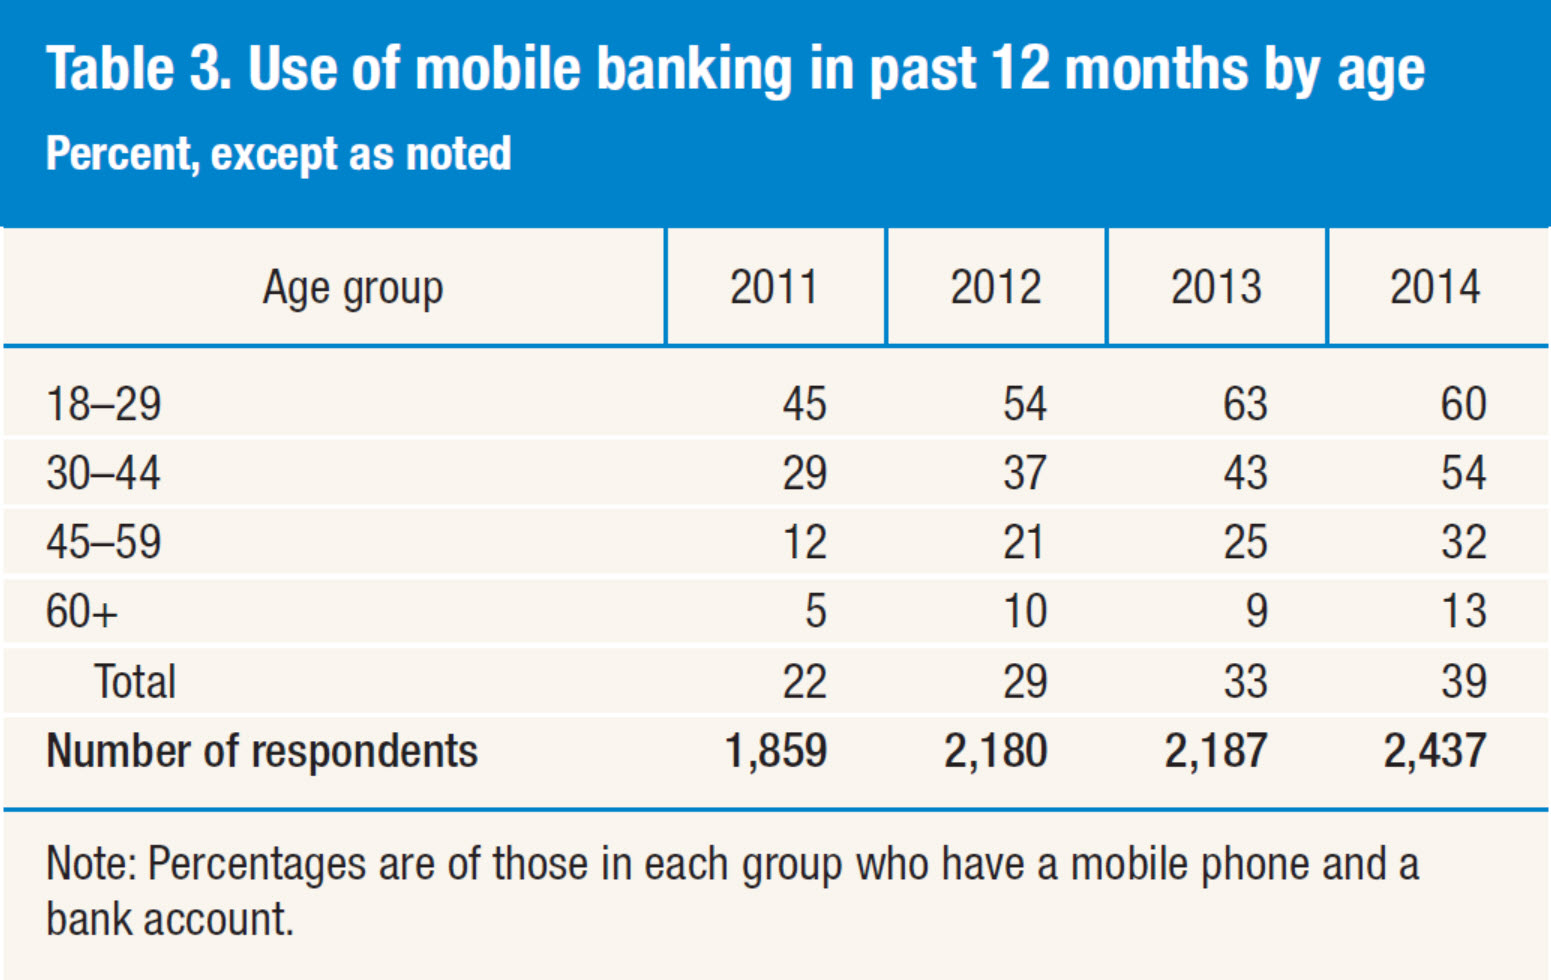 Mobile banking users by age